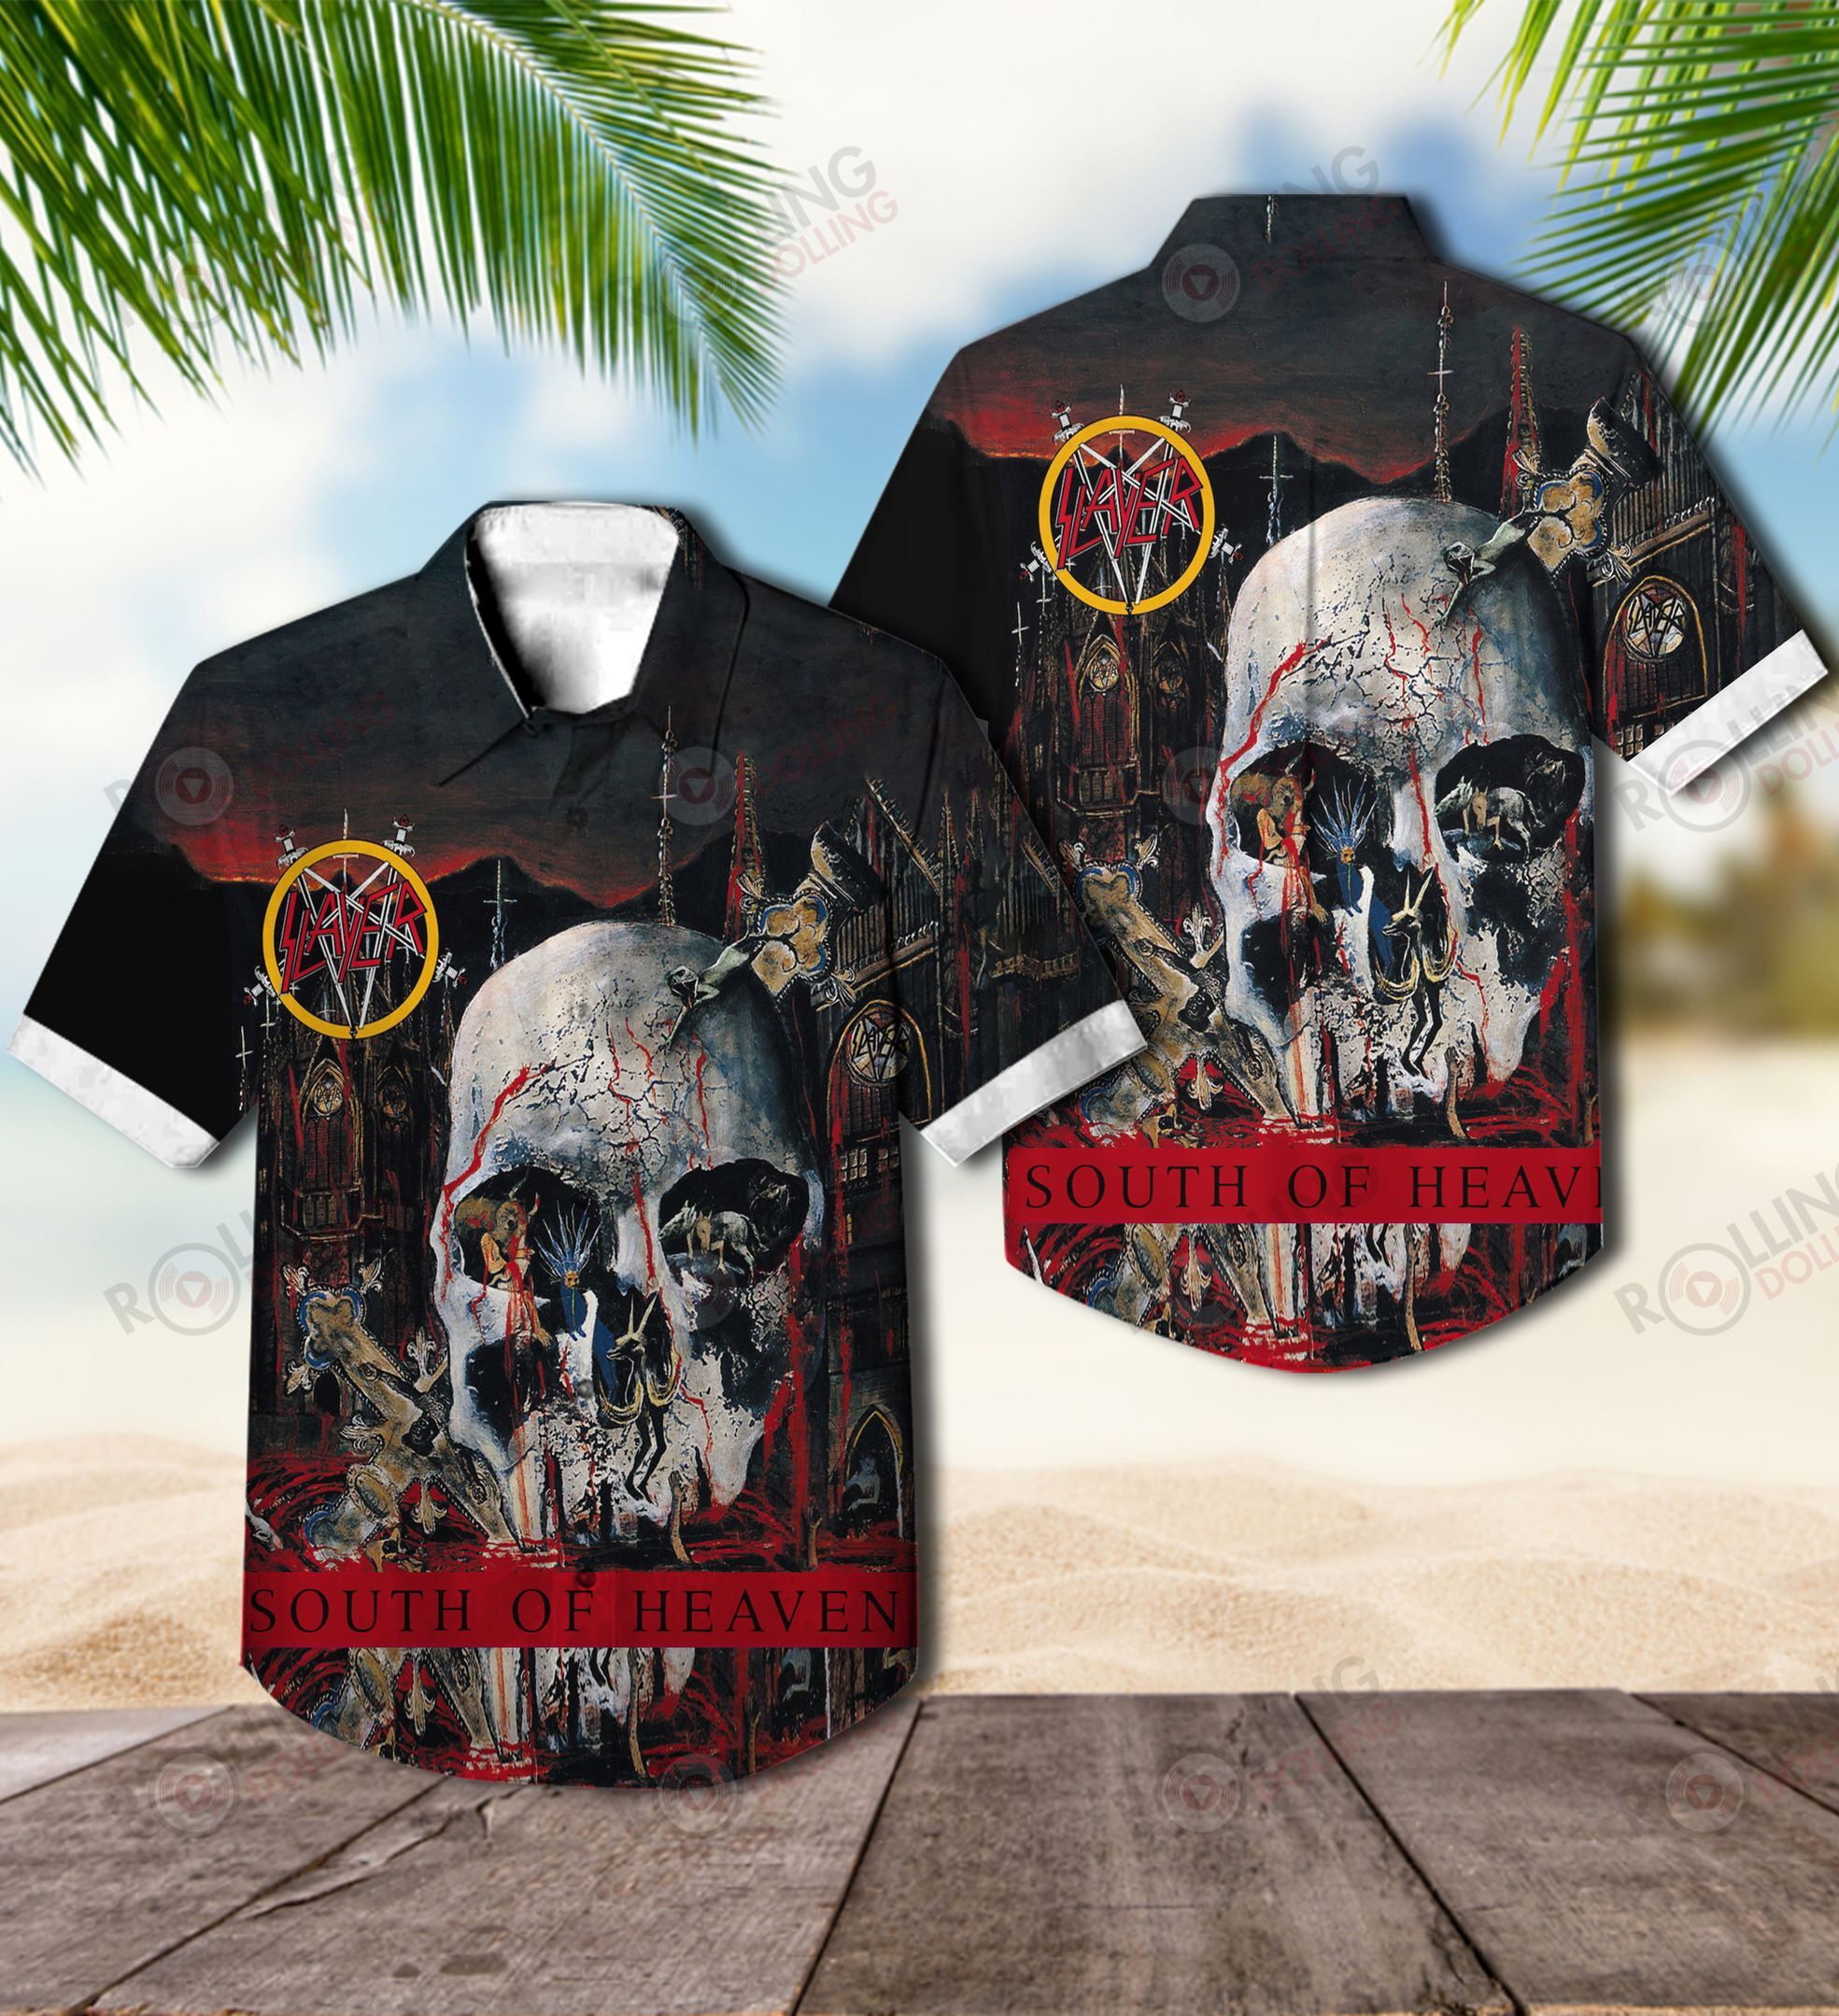 The Hawaiian Shirt is a popular shirt that is worn by Rock band fans 28